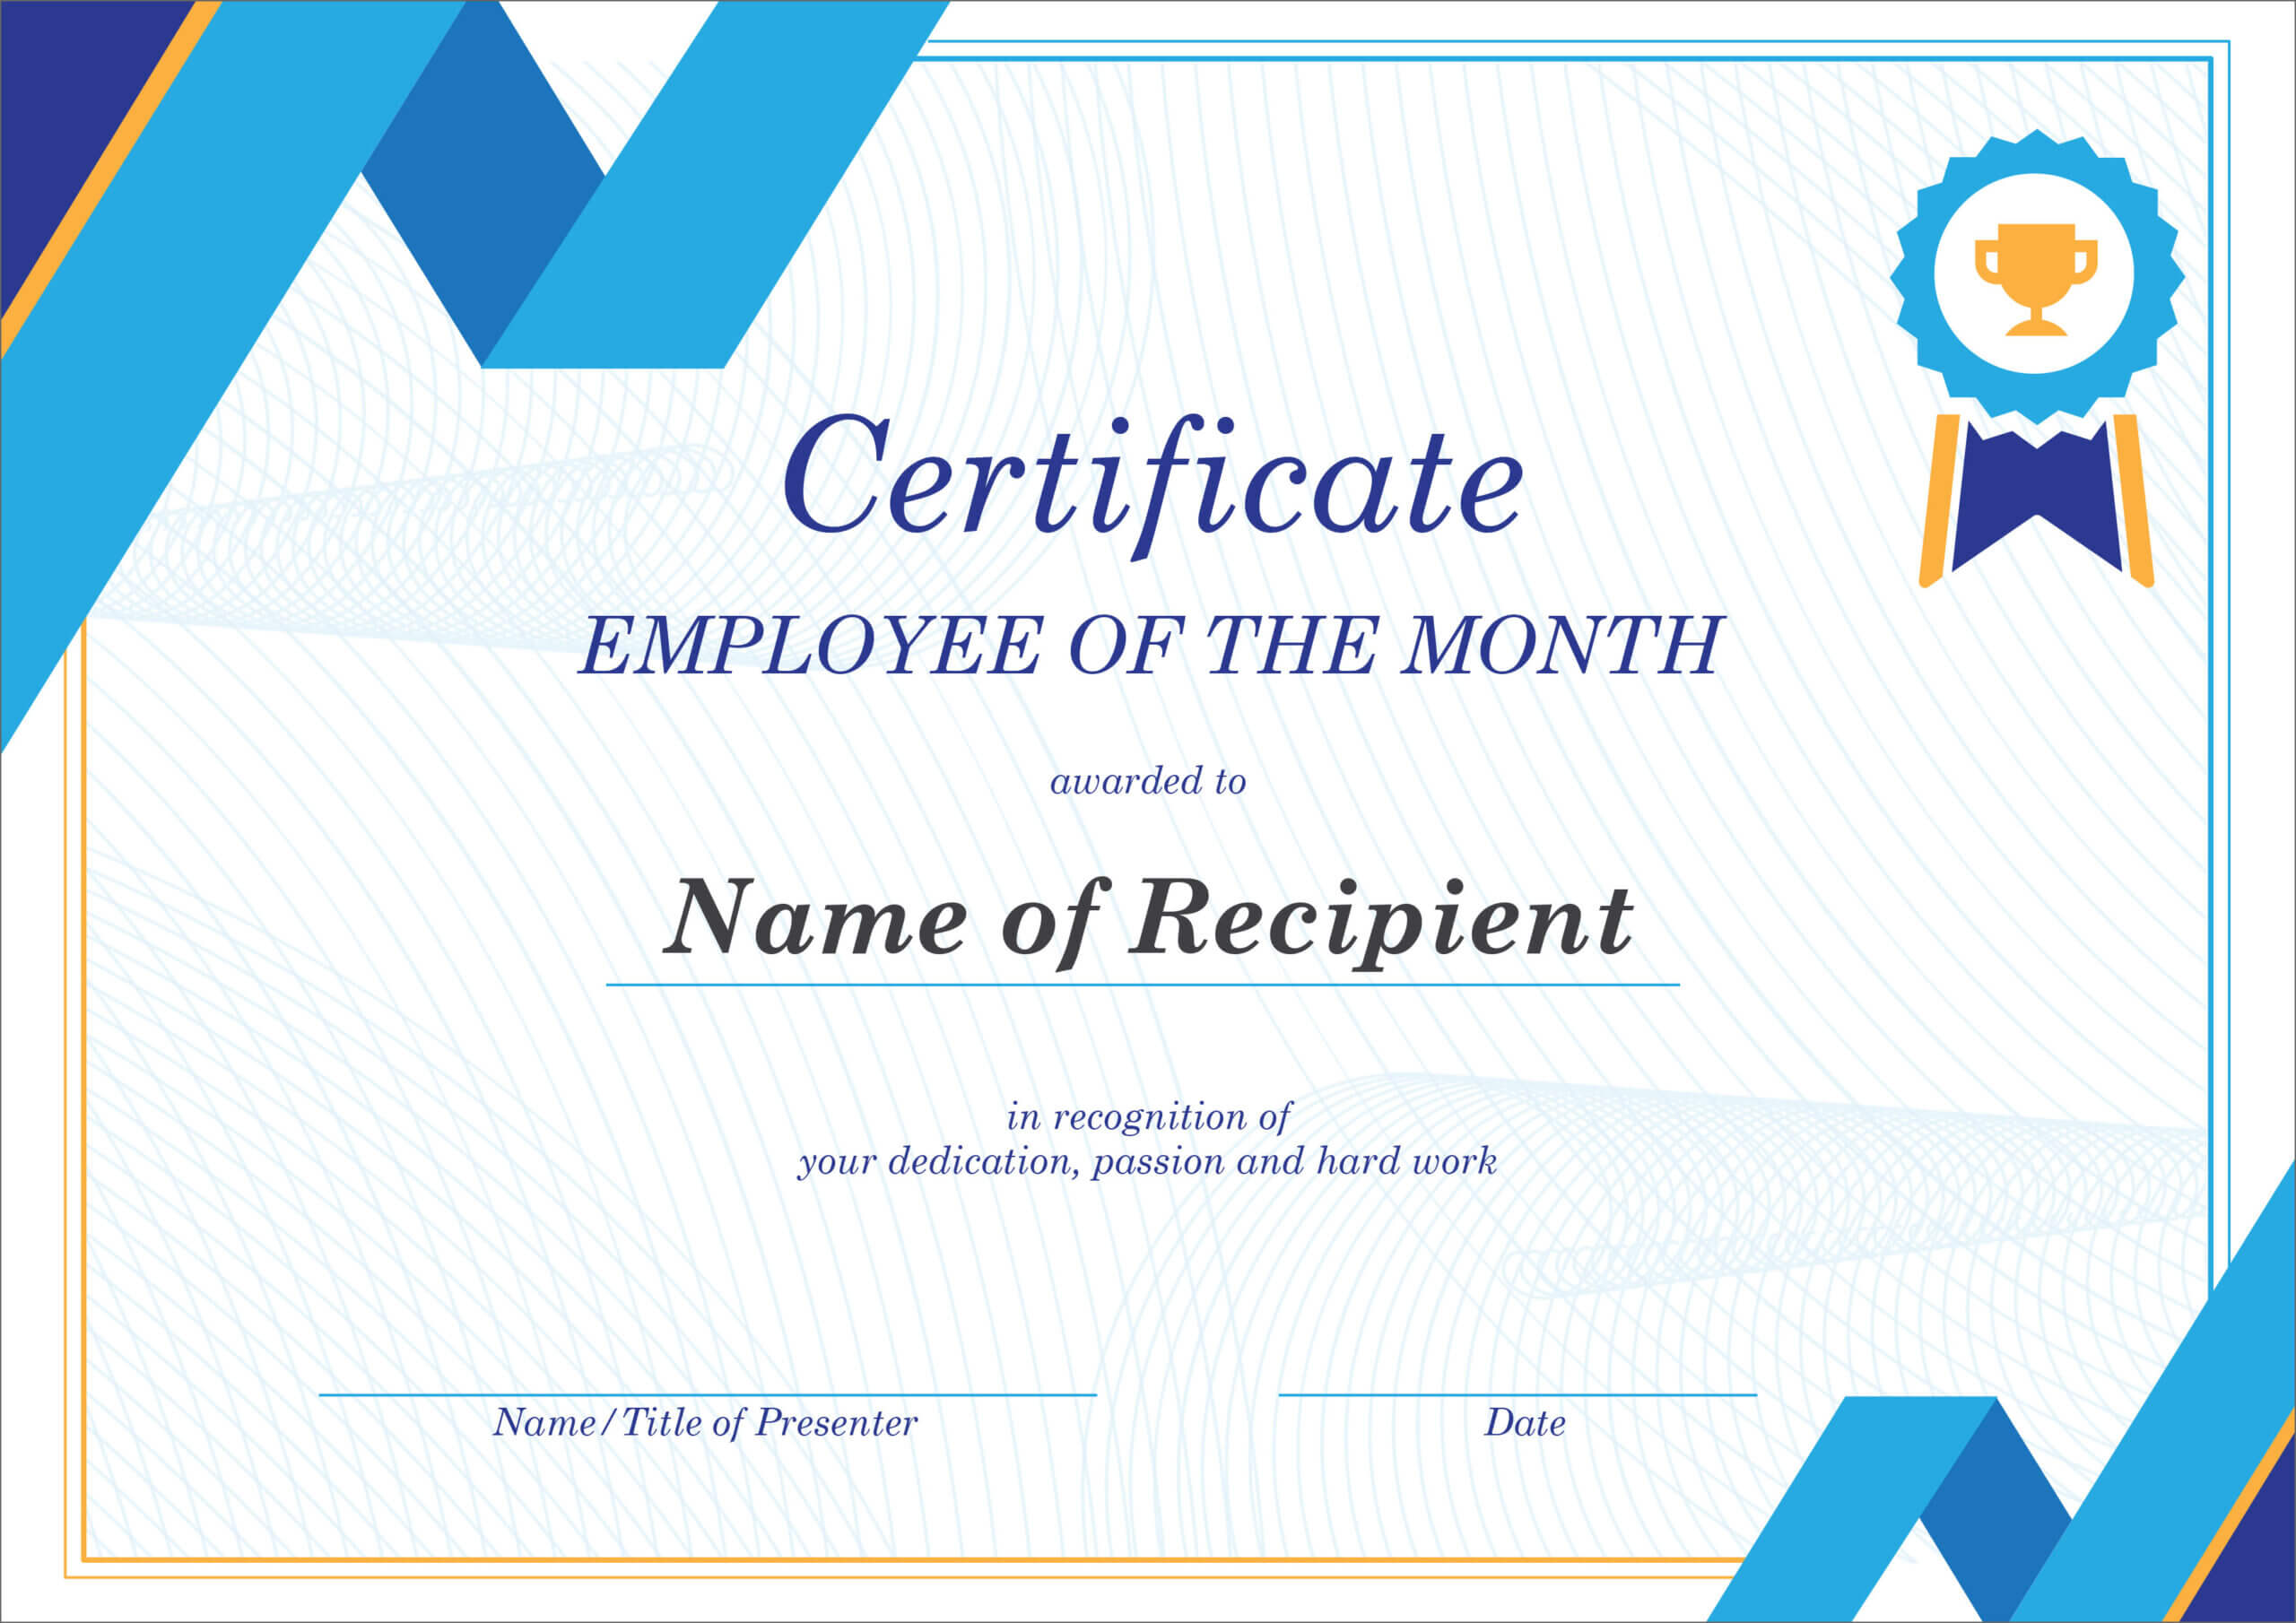 50 Free Creative Blank Certificate Templates In Psd Regarding Manager Of The Month Certificate Template